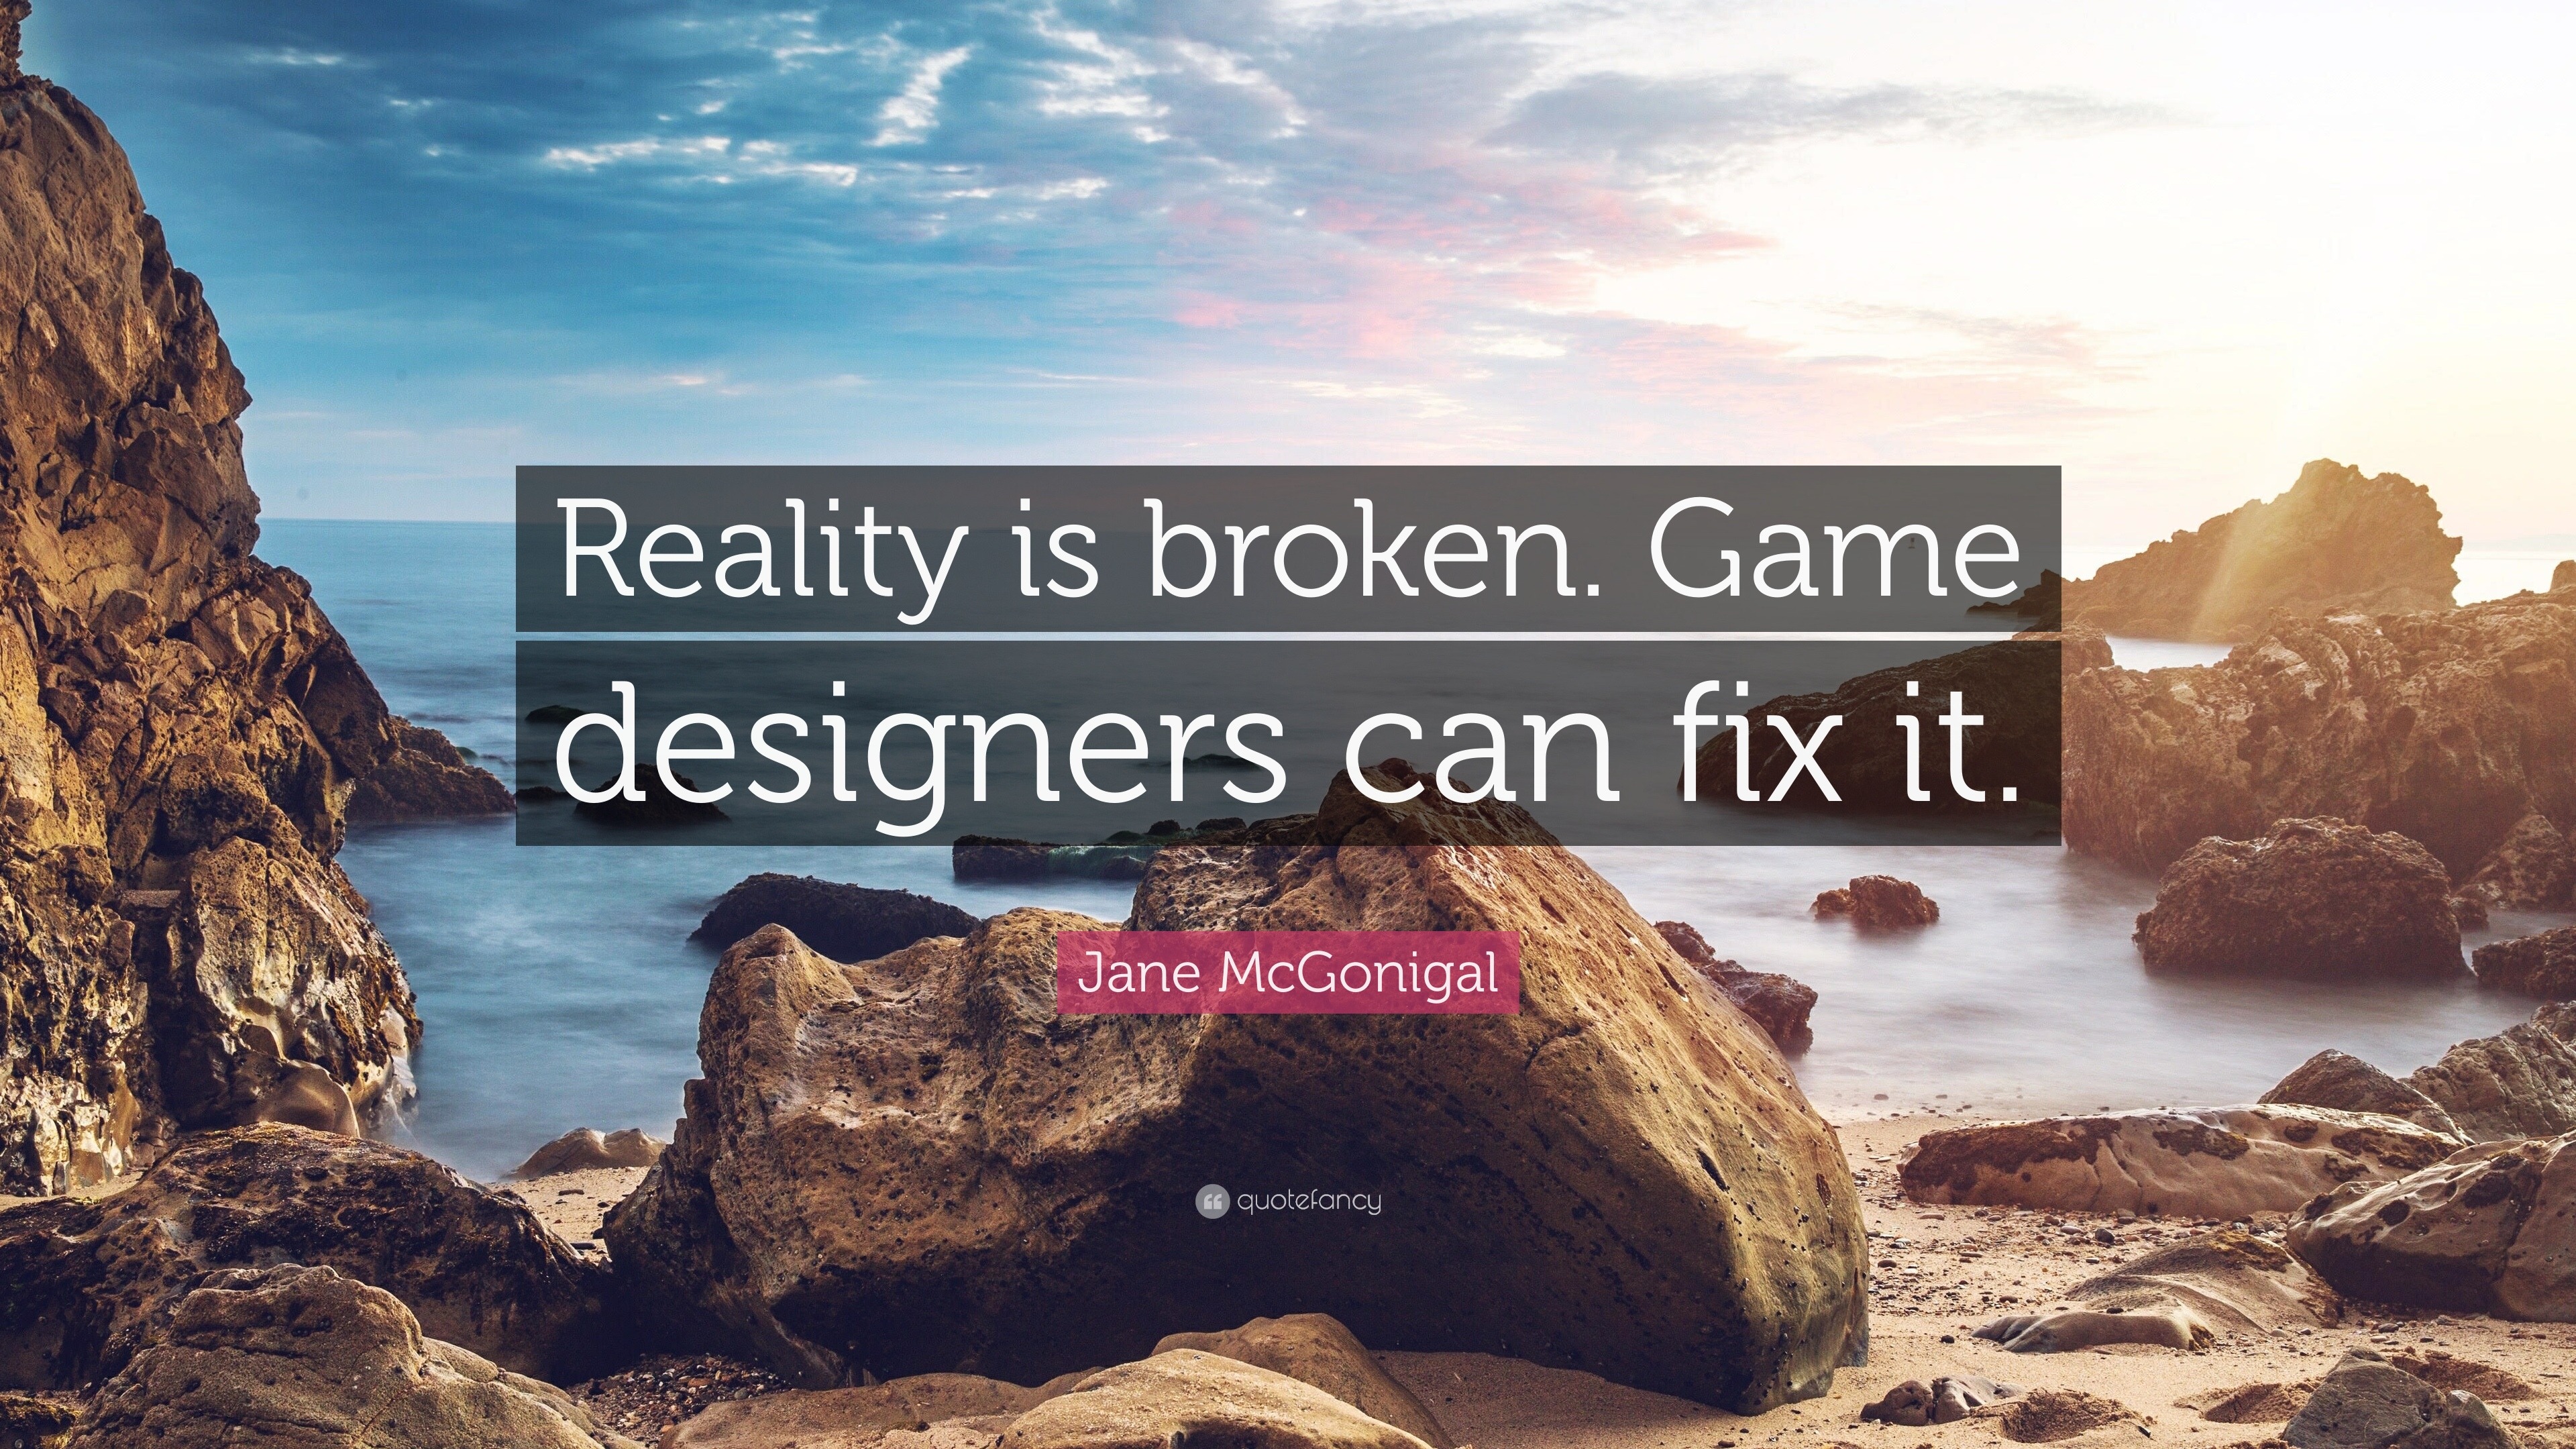 Reality is Broken by Jane McGonigal